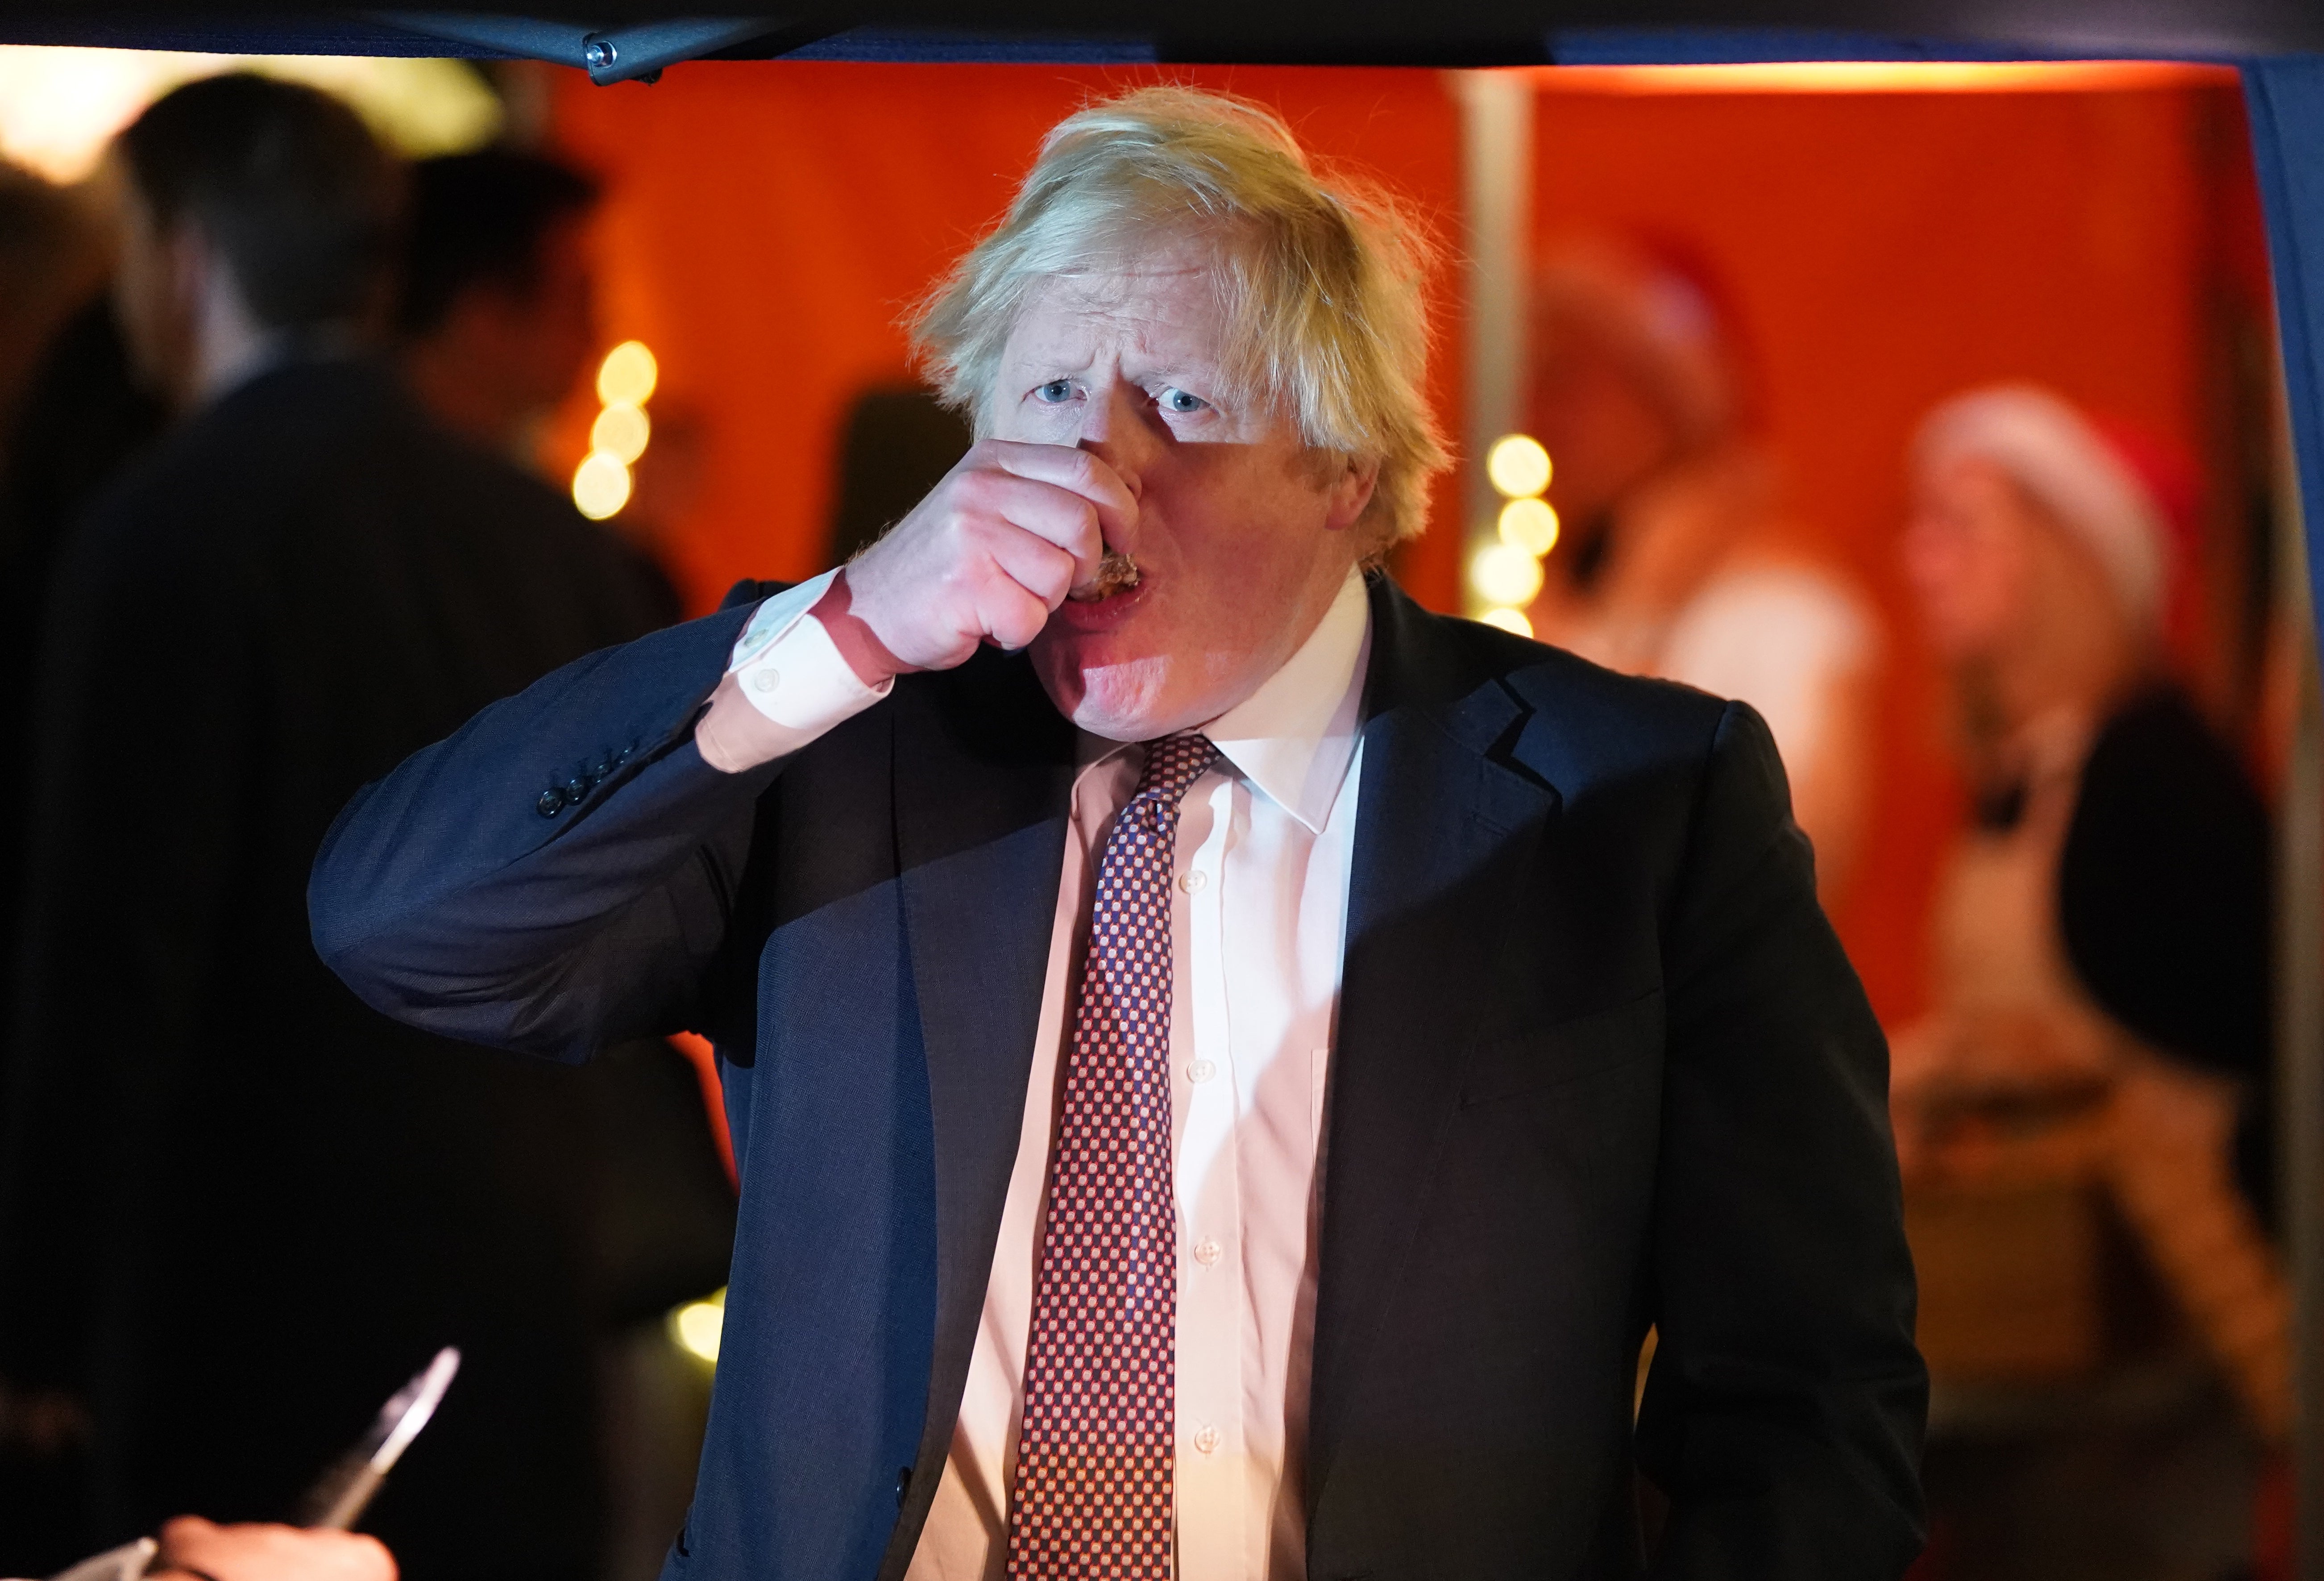 Boris Johnson samples the goods as he visited a UK Food and Drinks market set up in Downing Street on Tuesday (Stefan Rousseau/PA)